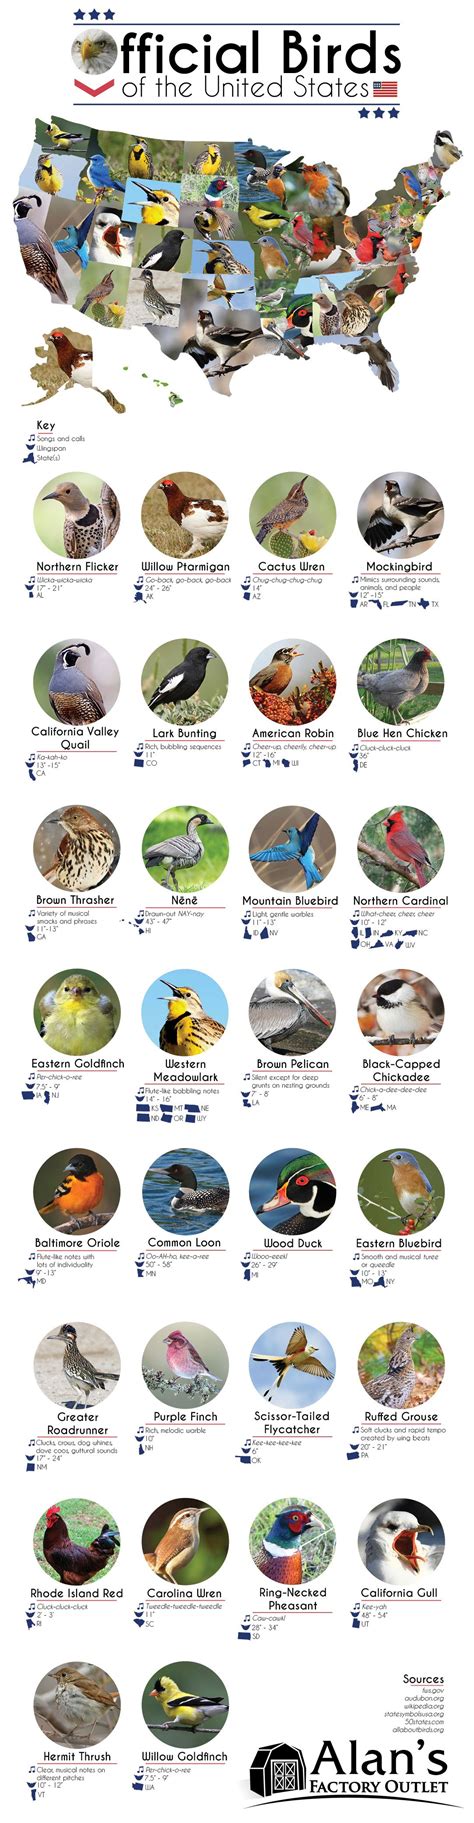 A Beautiful Visual Of The Official State Birds Of The United States